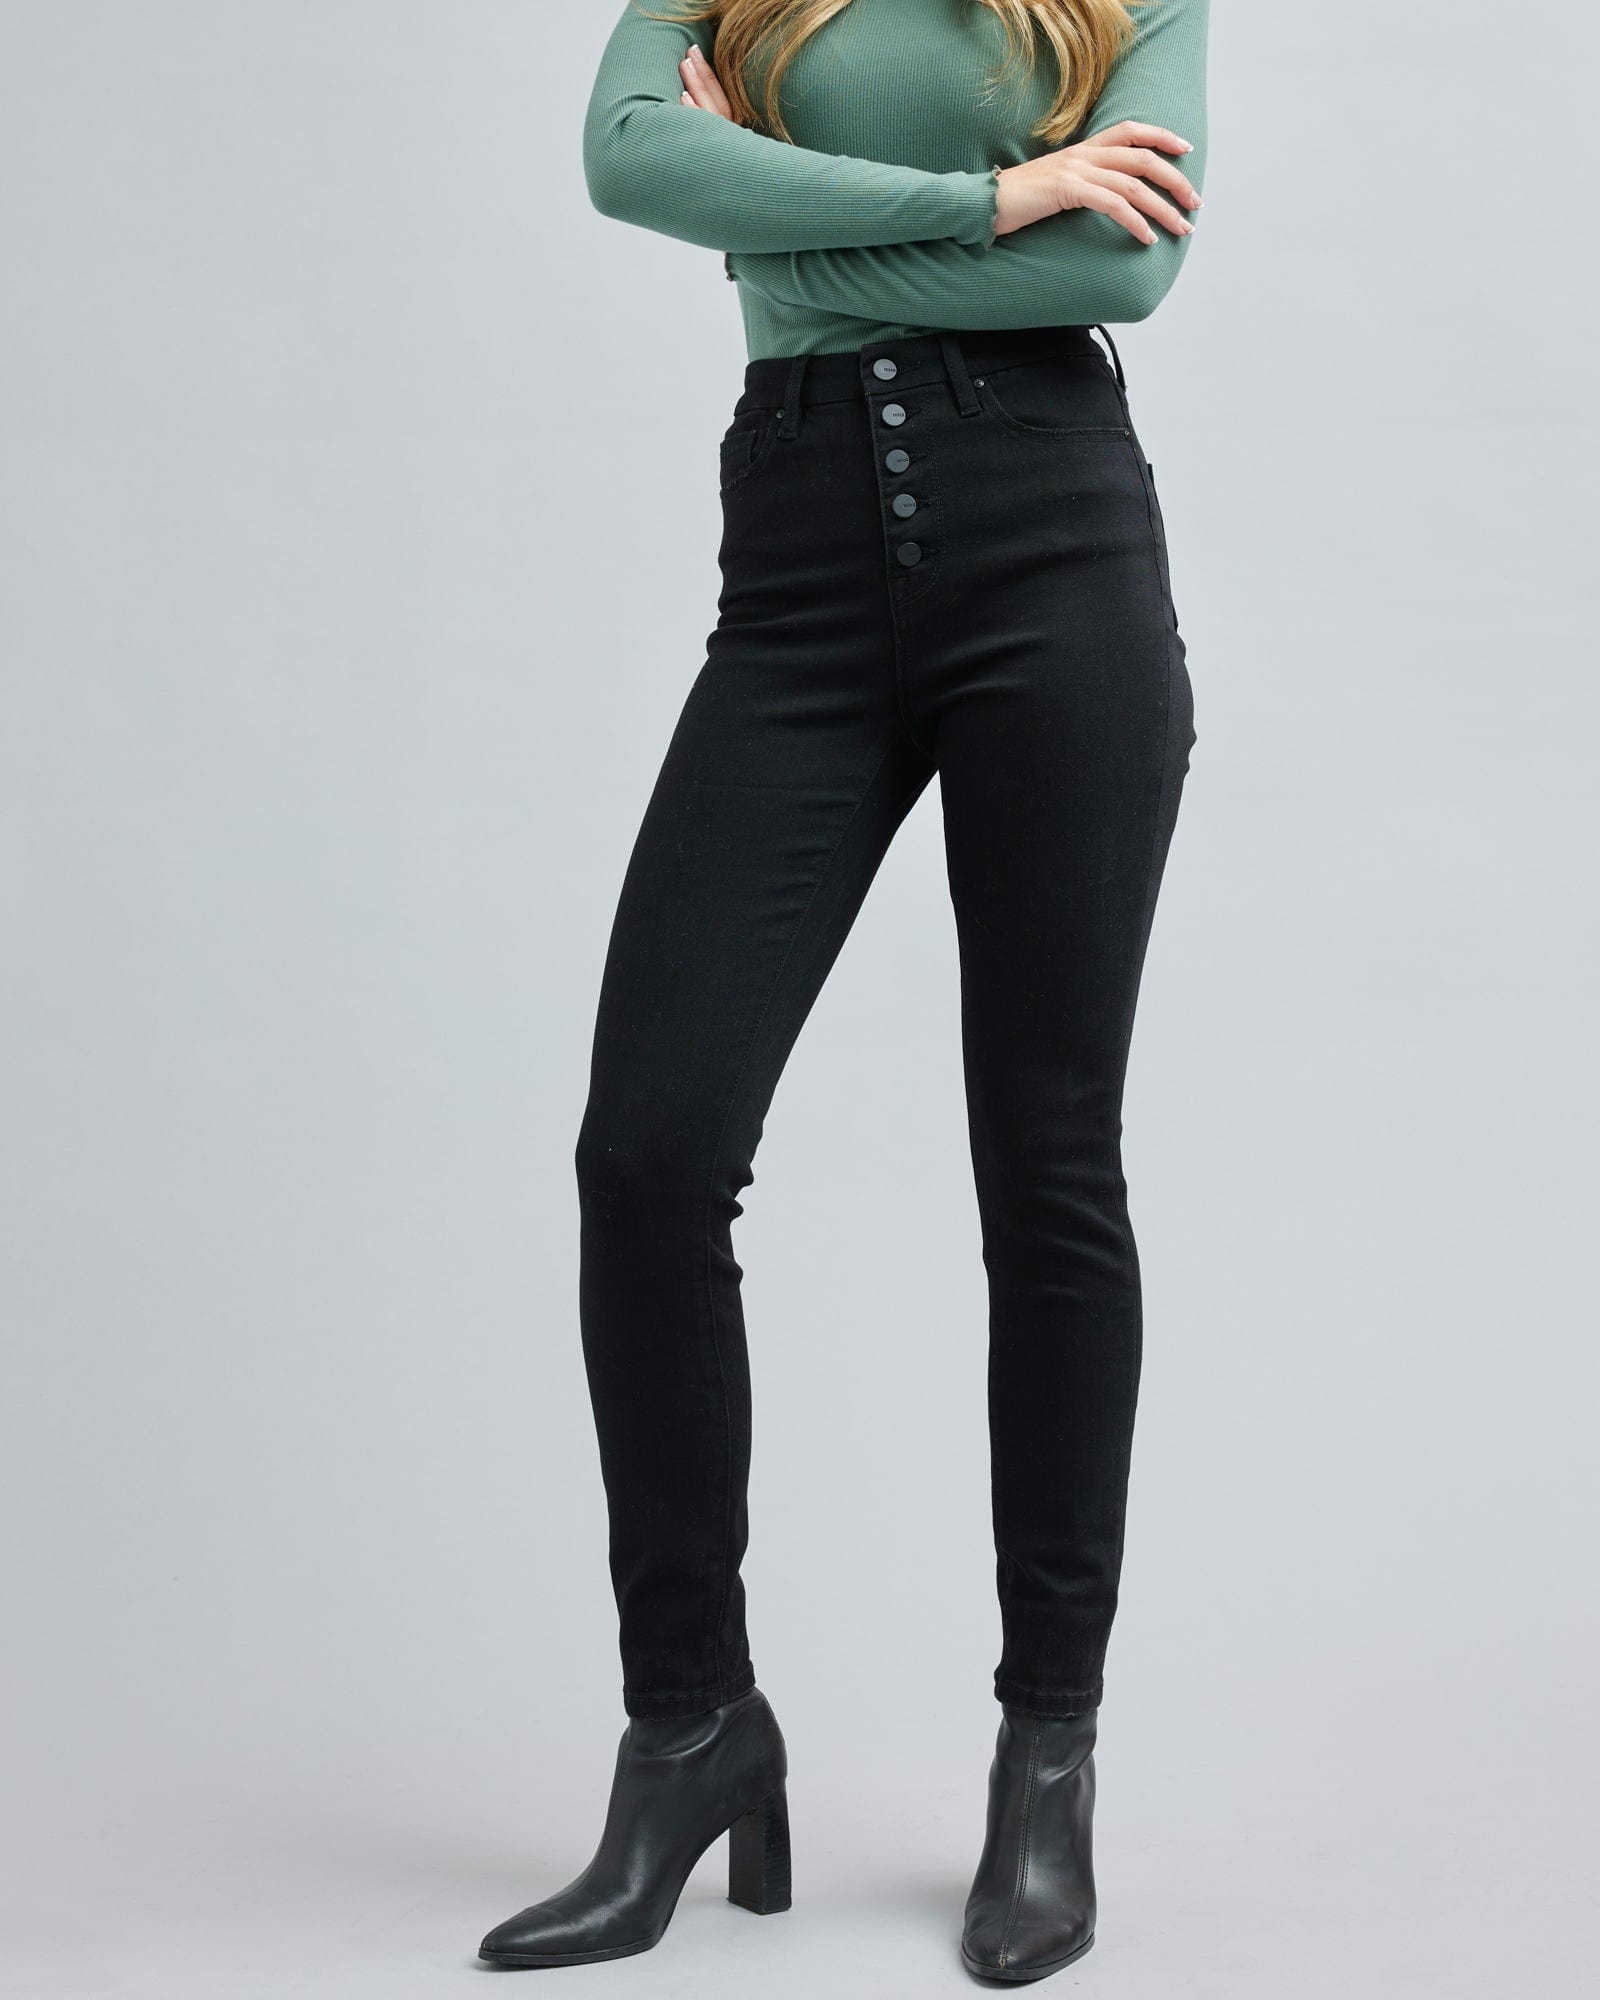 Woman in a high-waisted, black, denim pant